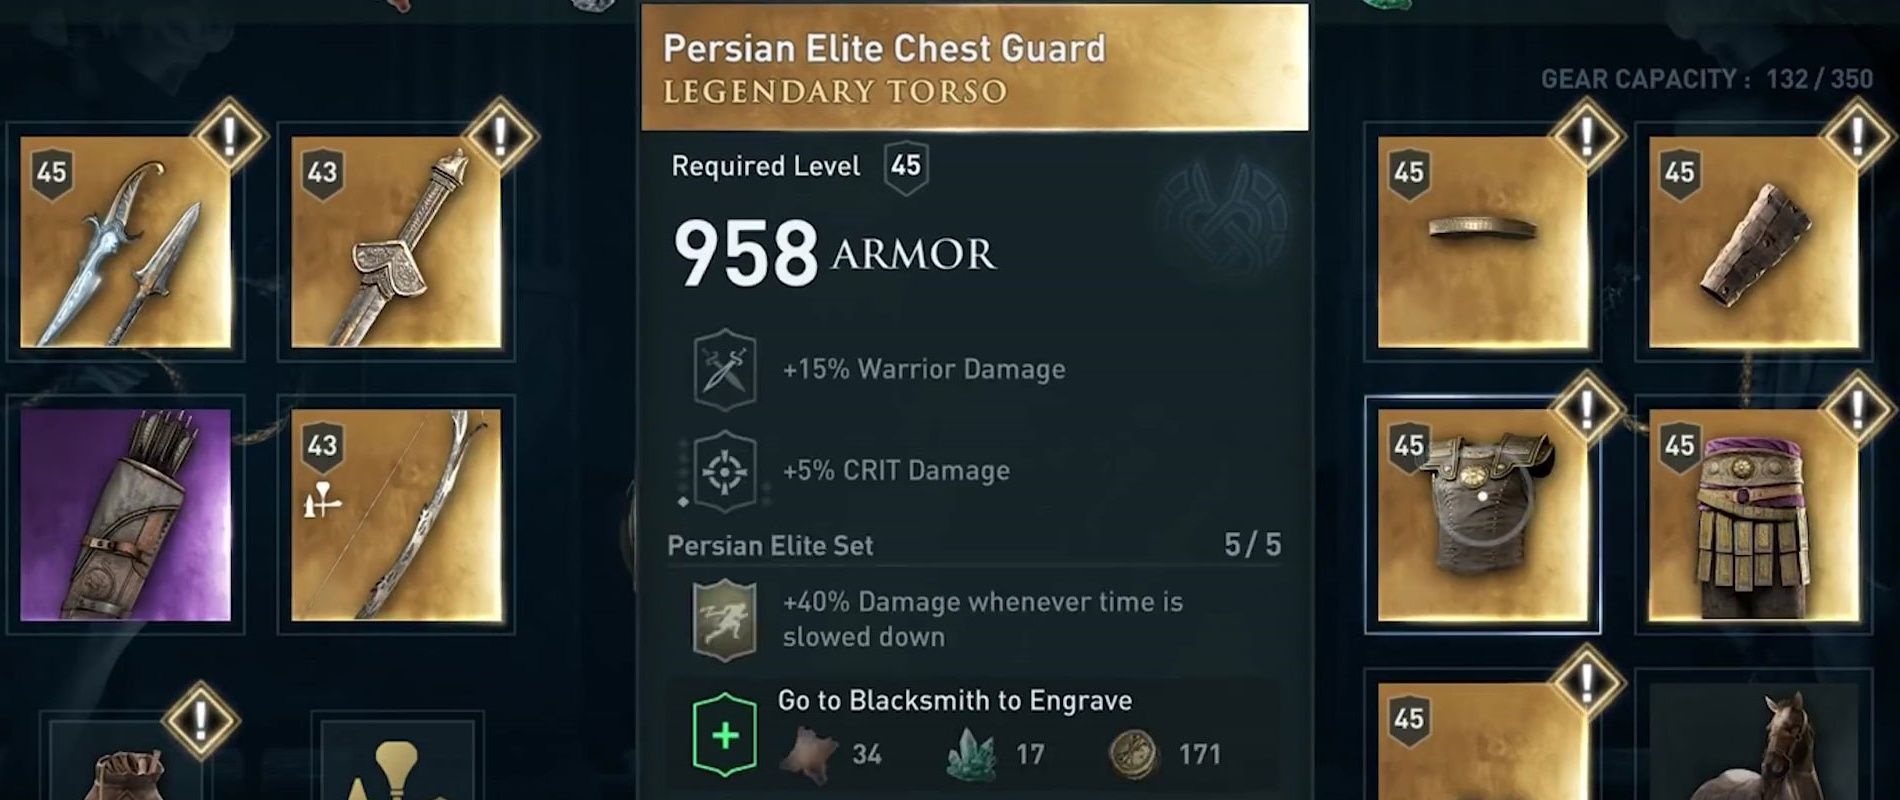 Persian Elite Chest Guard selected in the inventory screen